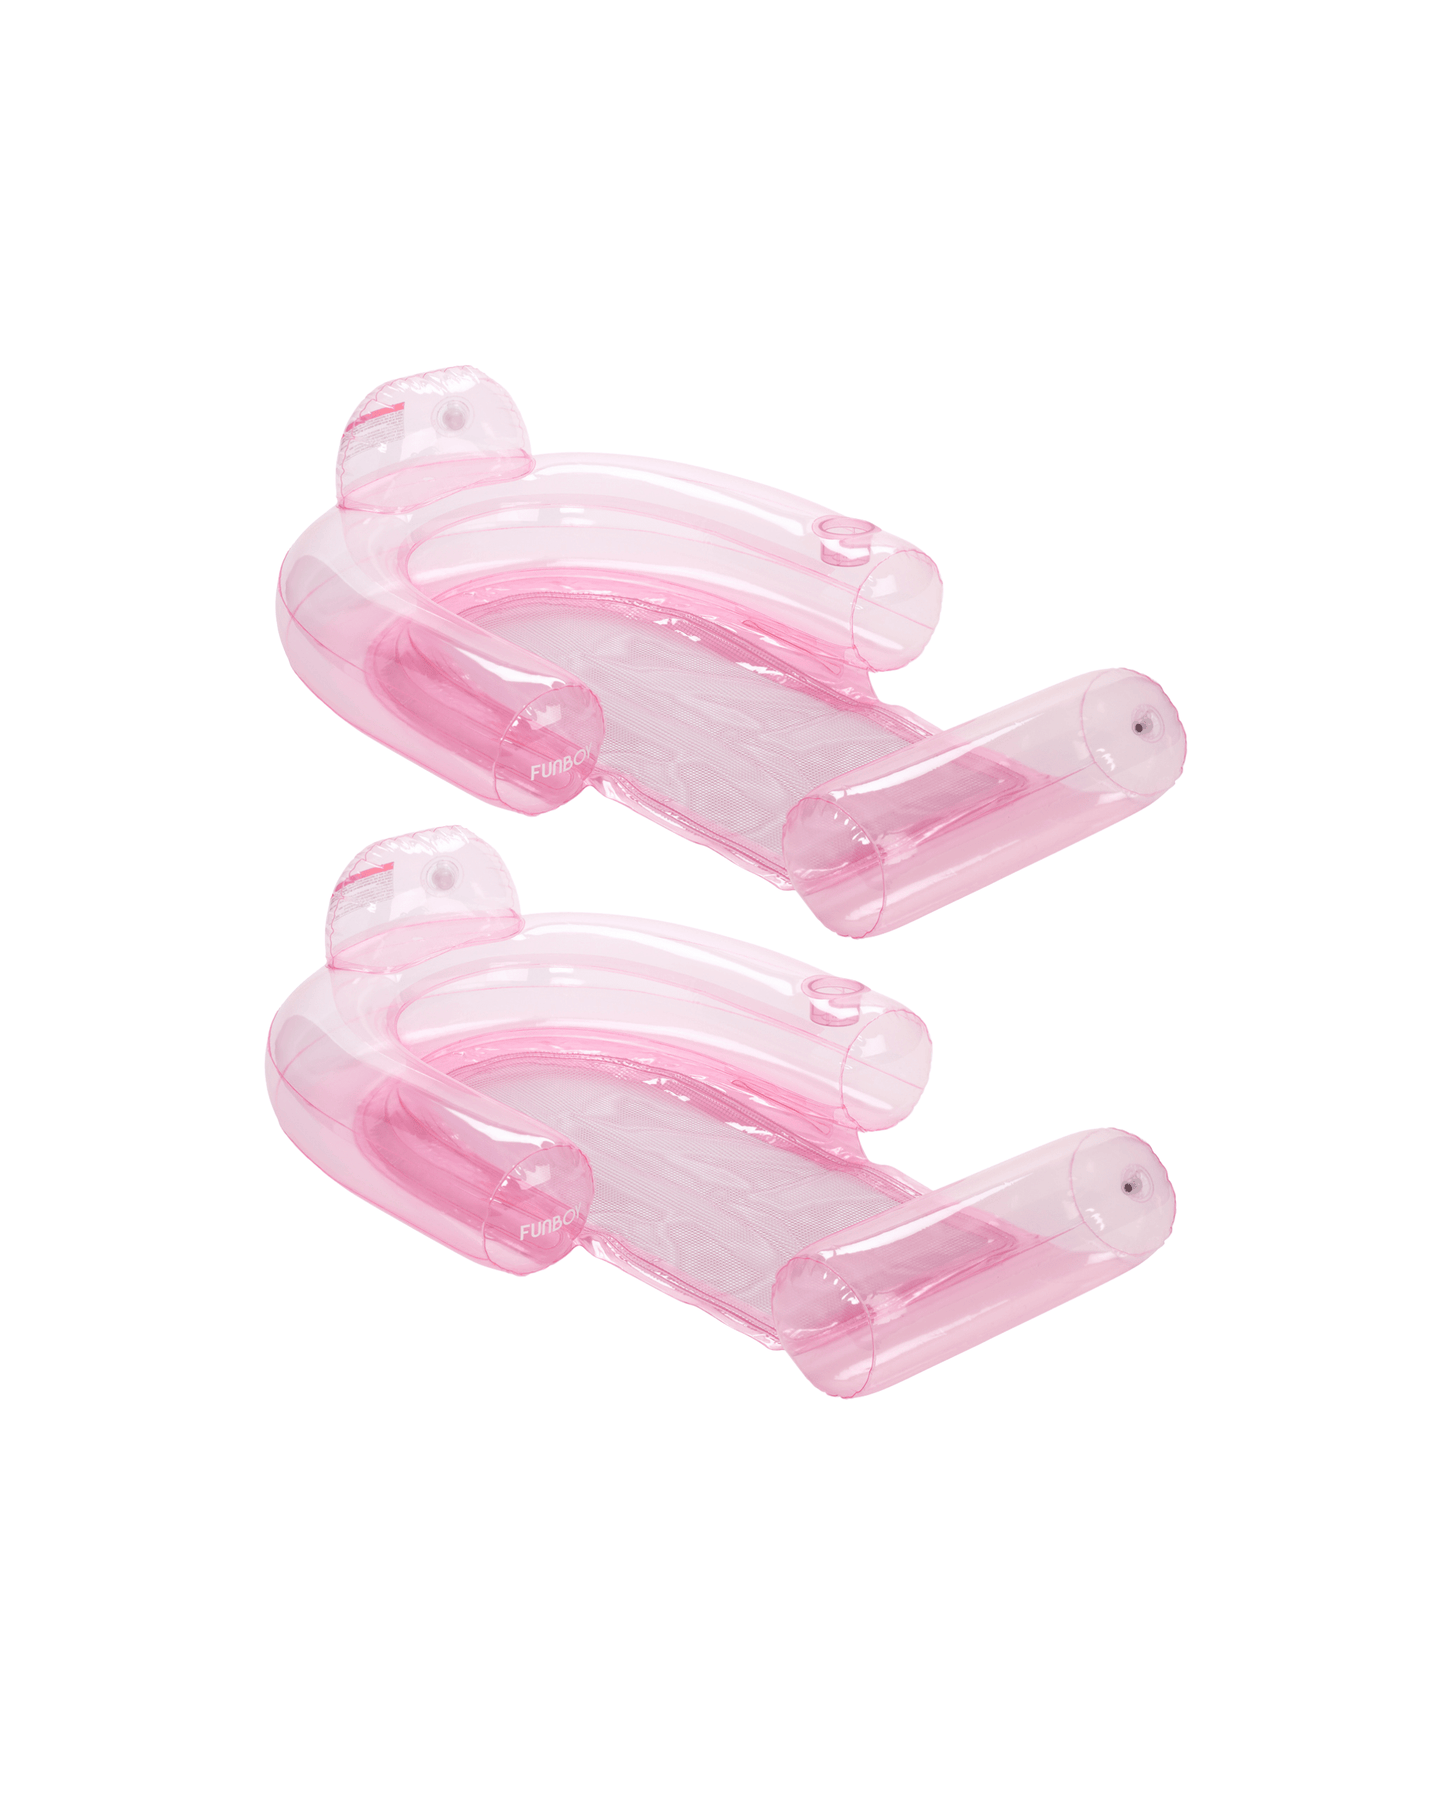 Clear Pink Mesh Lounger Pool Float - 2 Pack